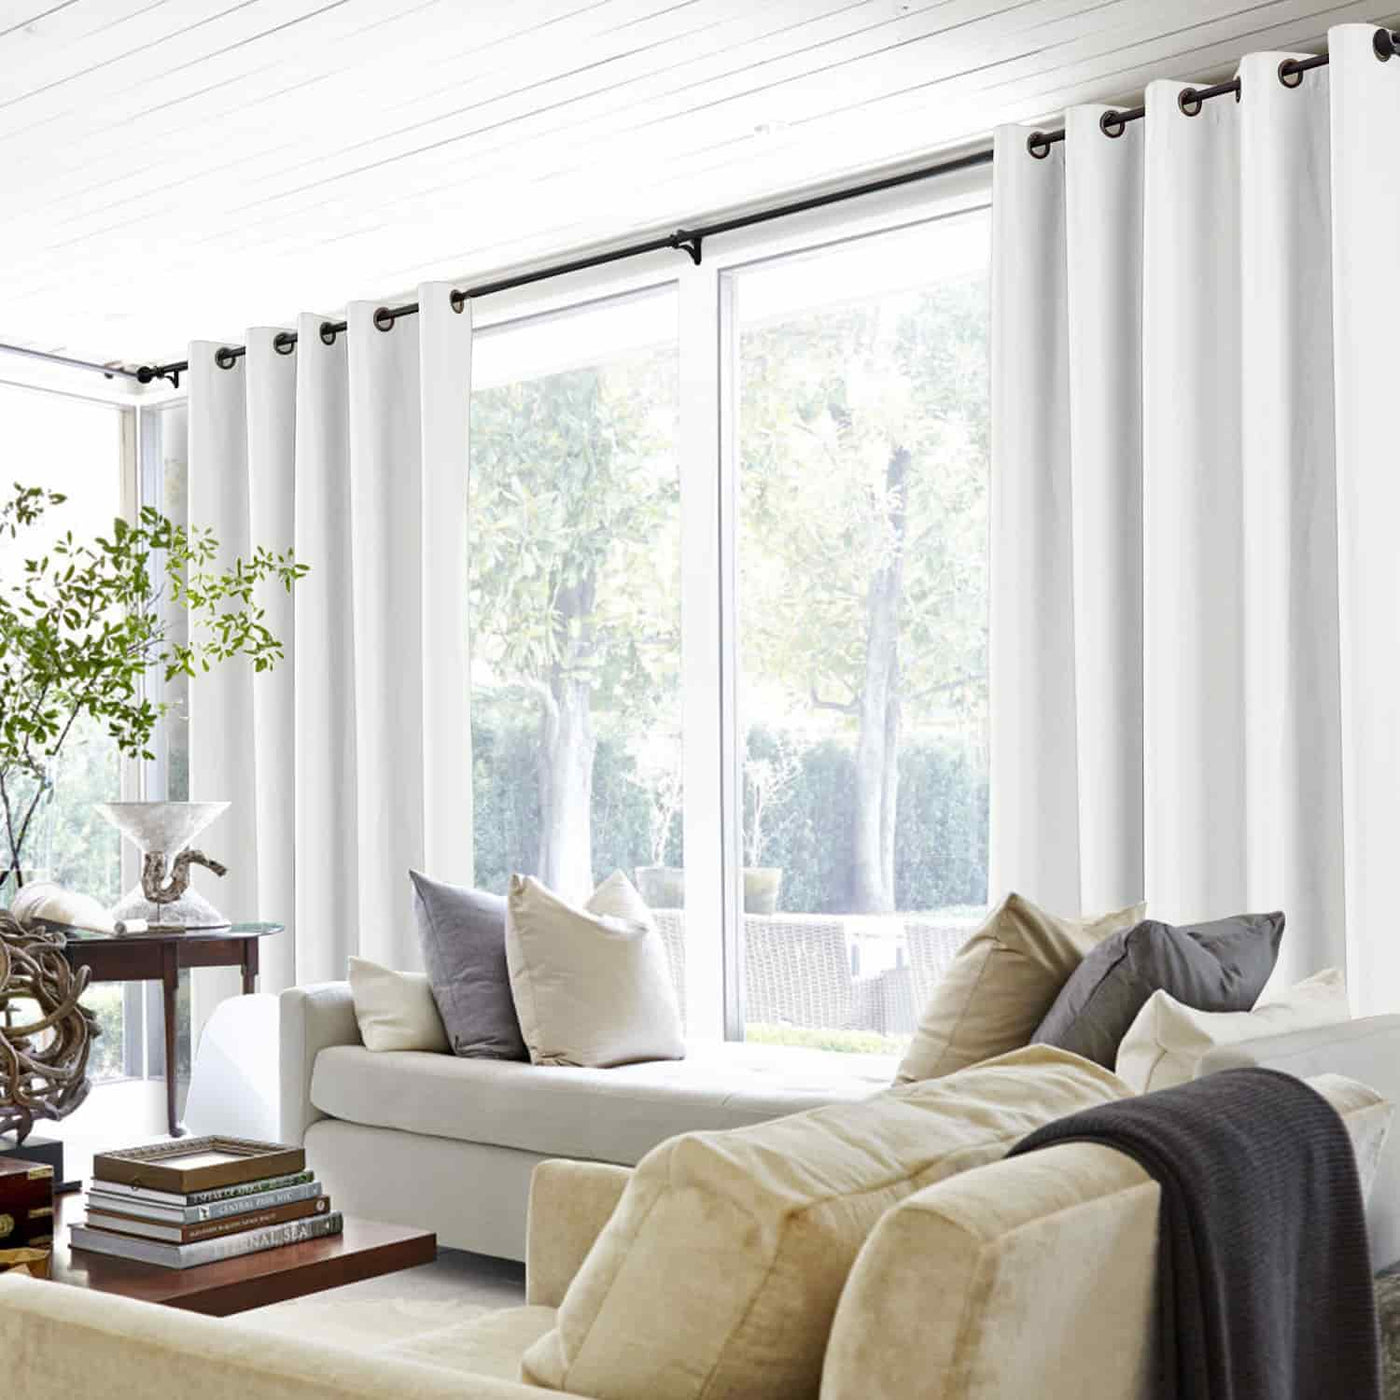 Saba Absolute Blackout Thermal Curtain with Foam Coated